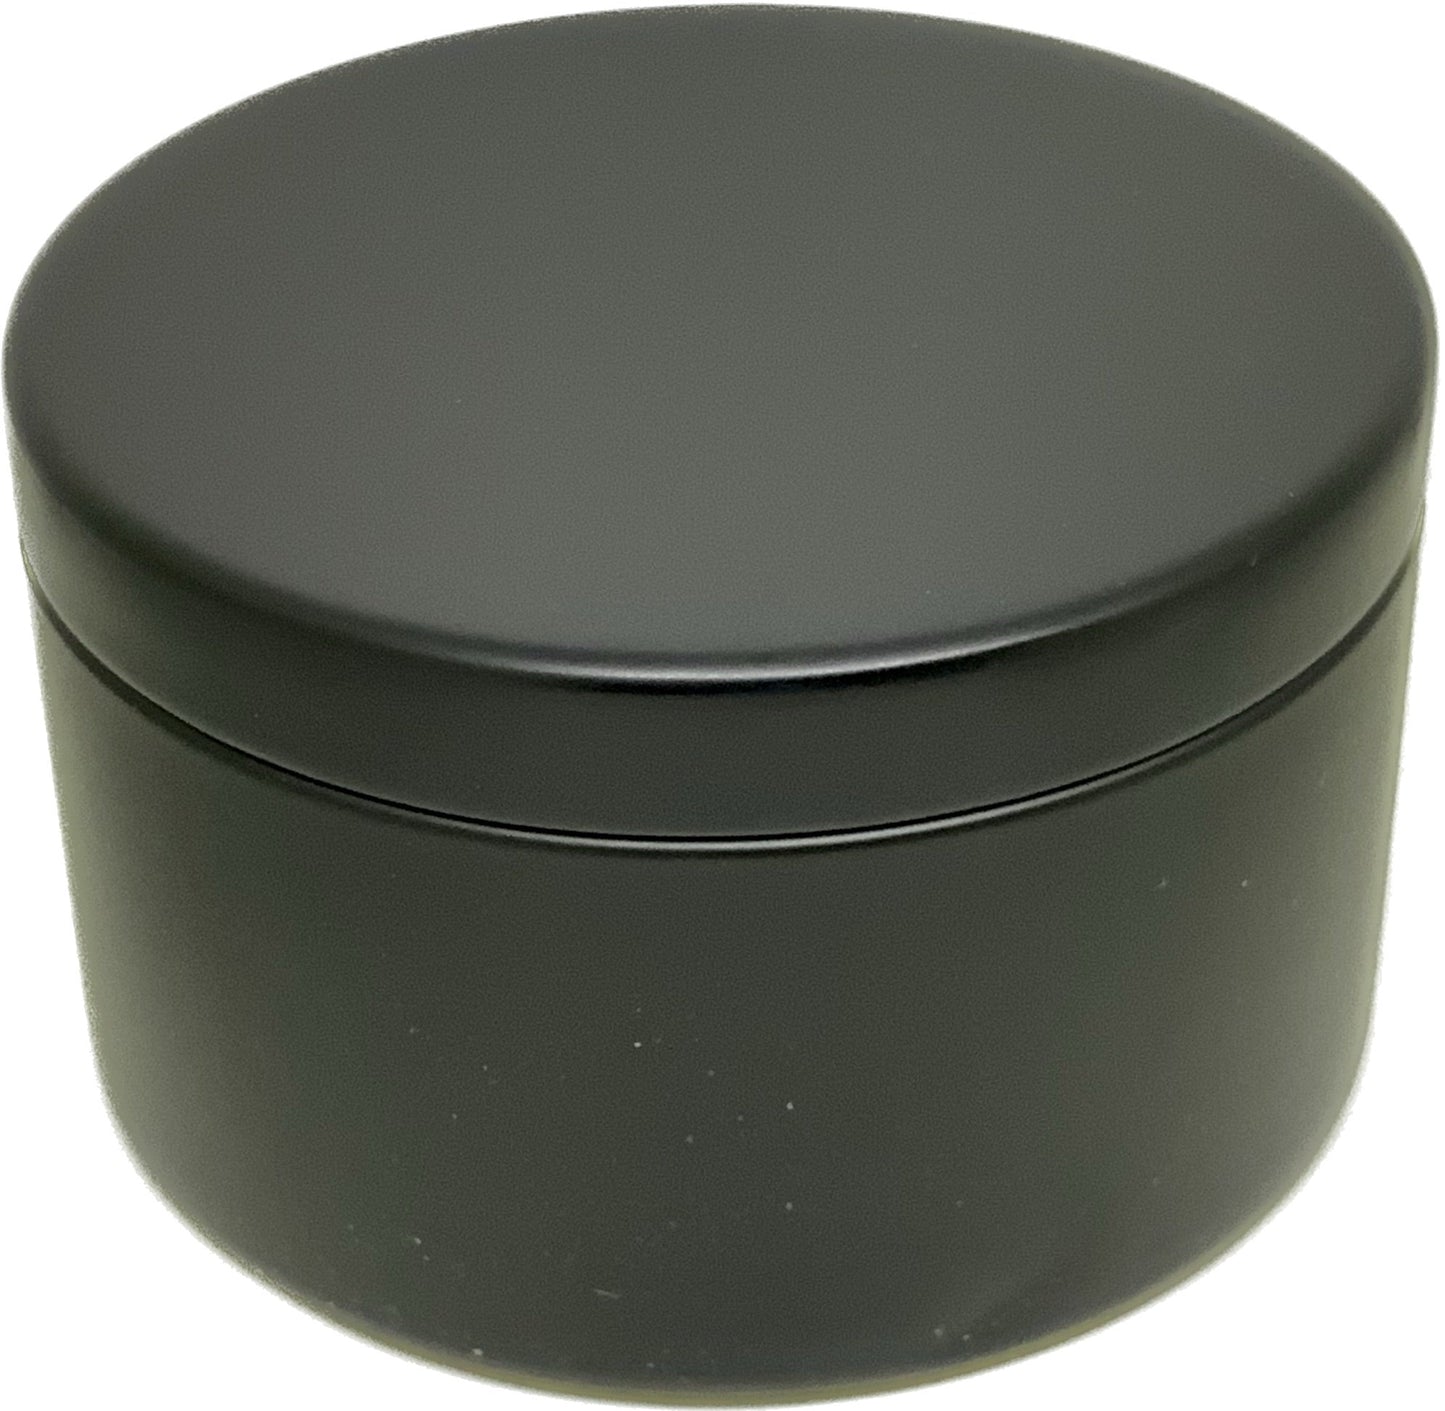 Cashmere is Here Scented Candle